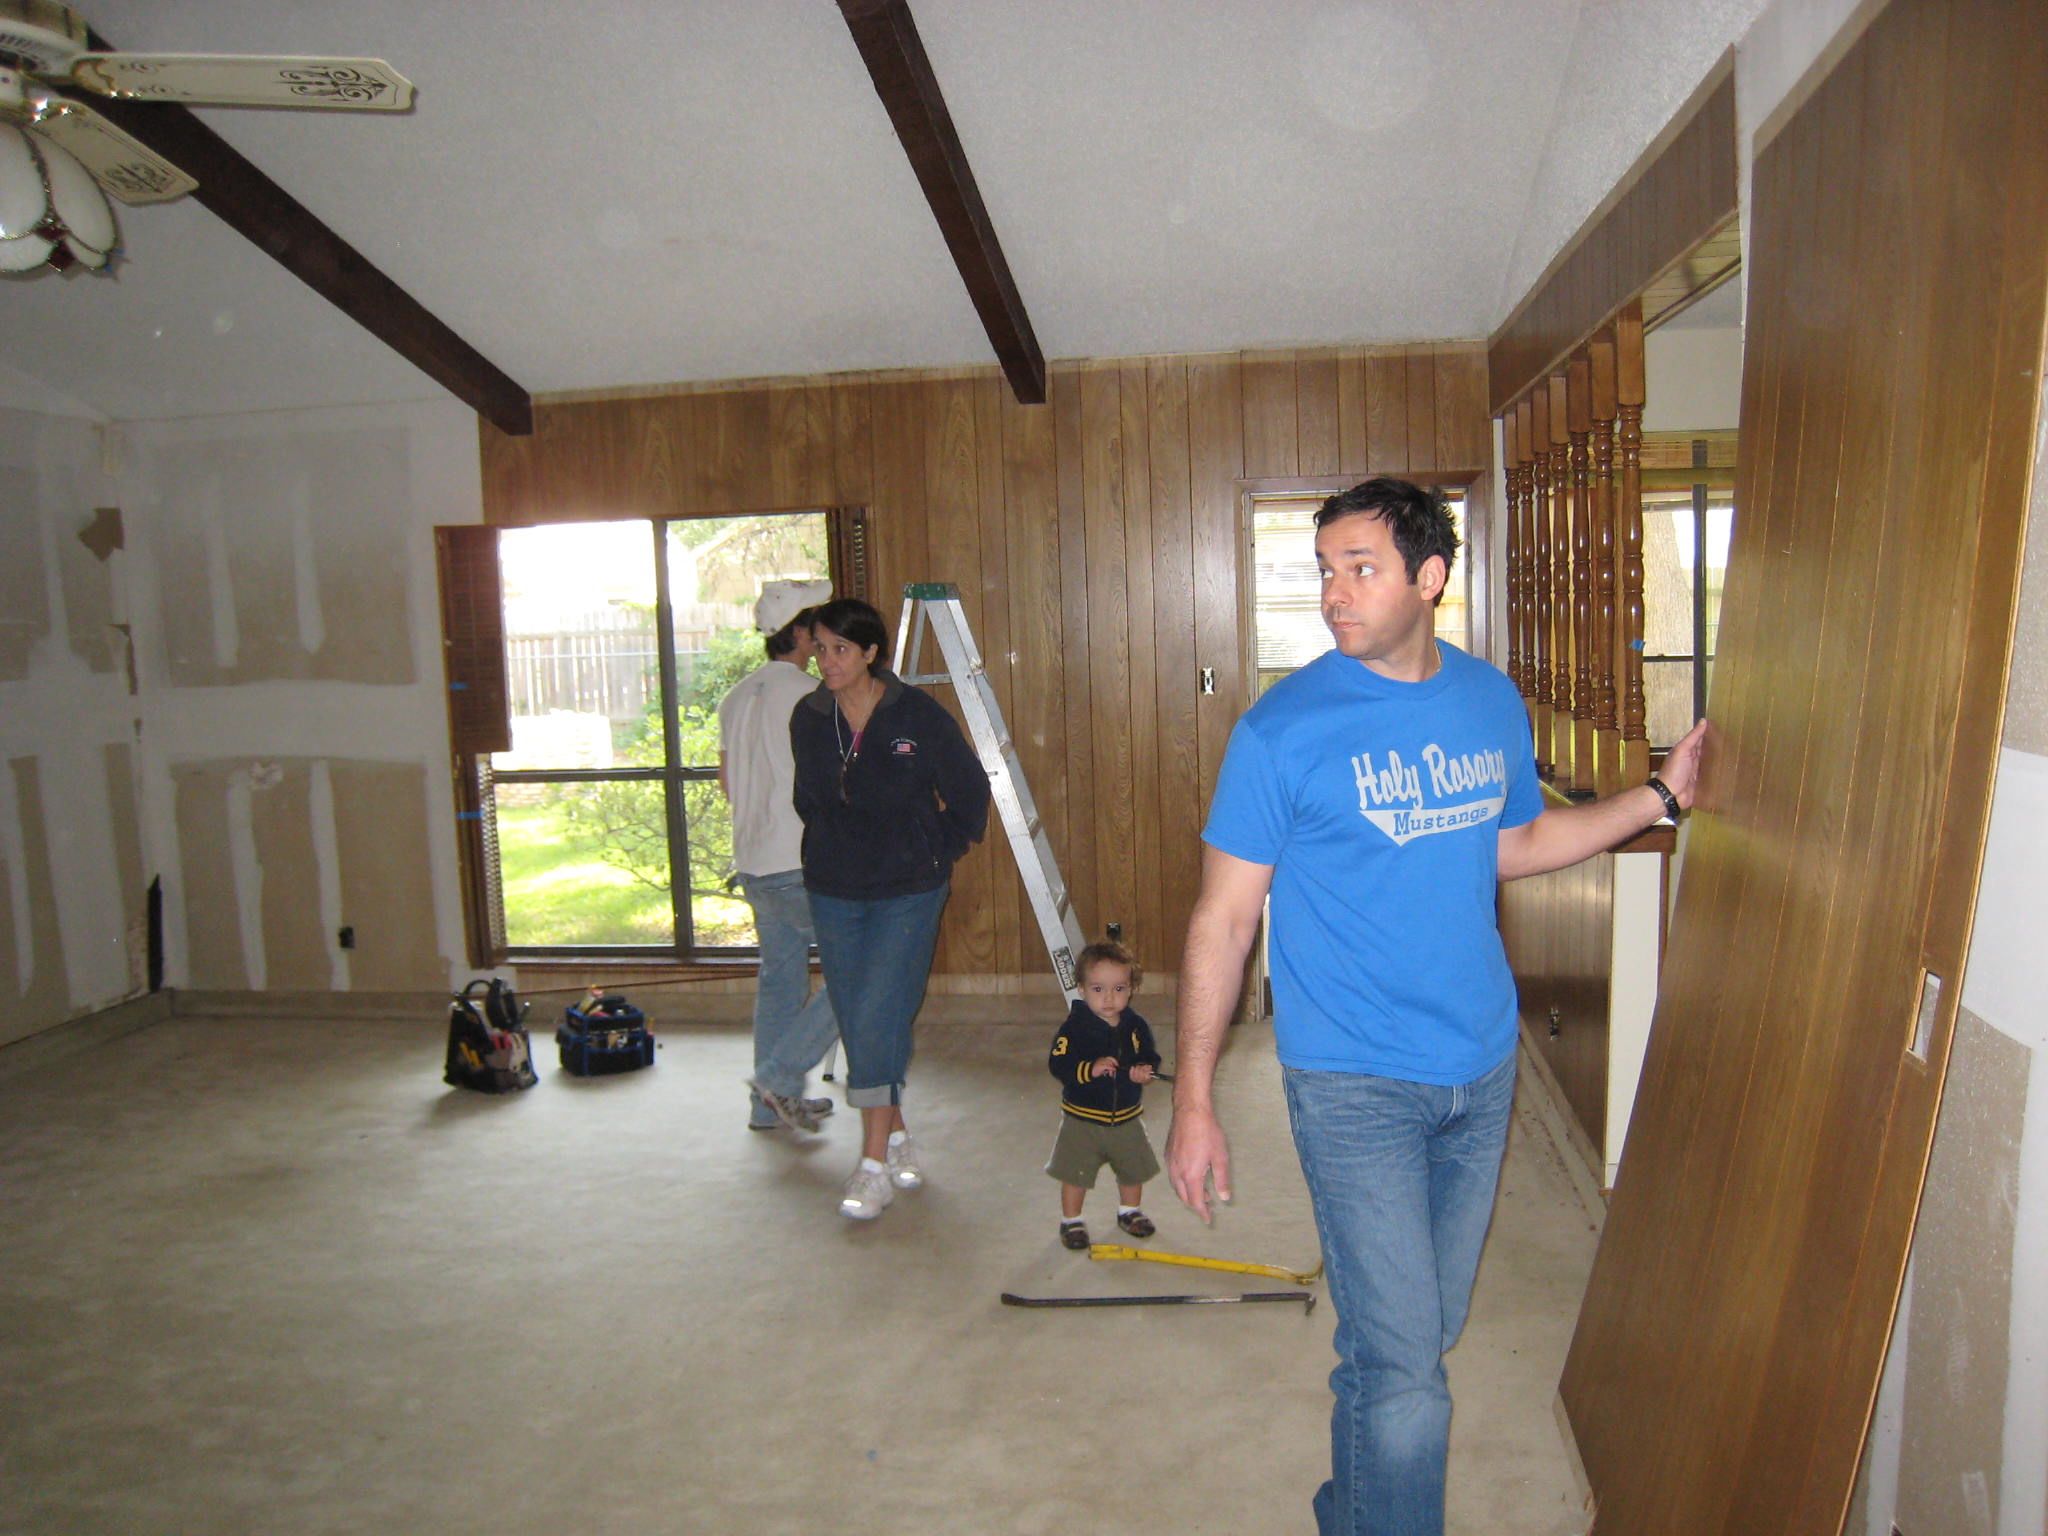 Living Room Wood Paneling Removal from ranch style home.